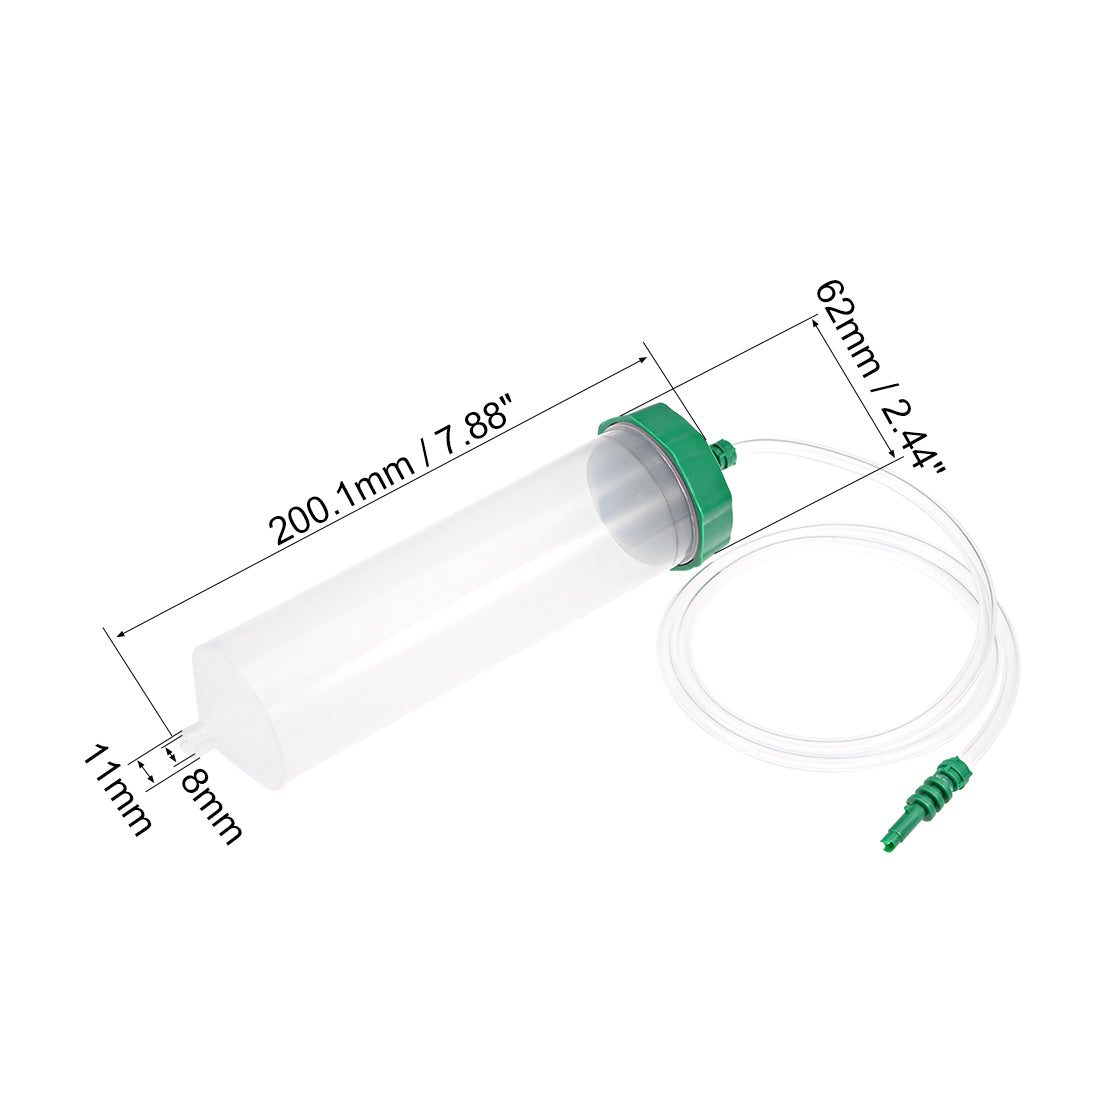 uxcell Uxcell Air Tubing Glue Dispenser Syringes 300cc Clear w Adapter for Industrial (Plastic Cover)